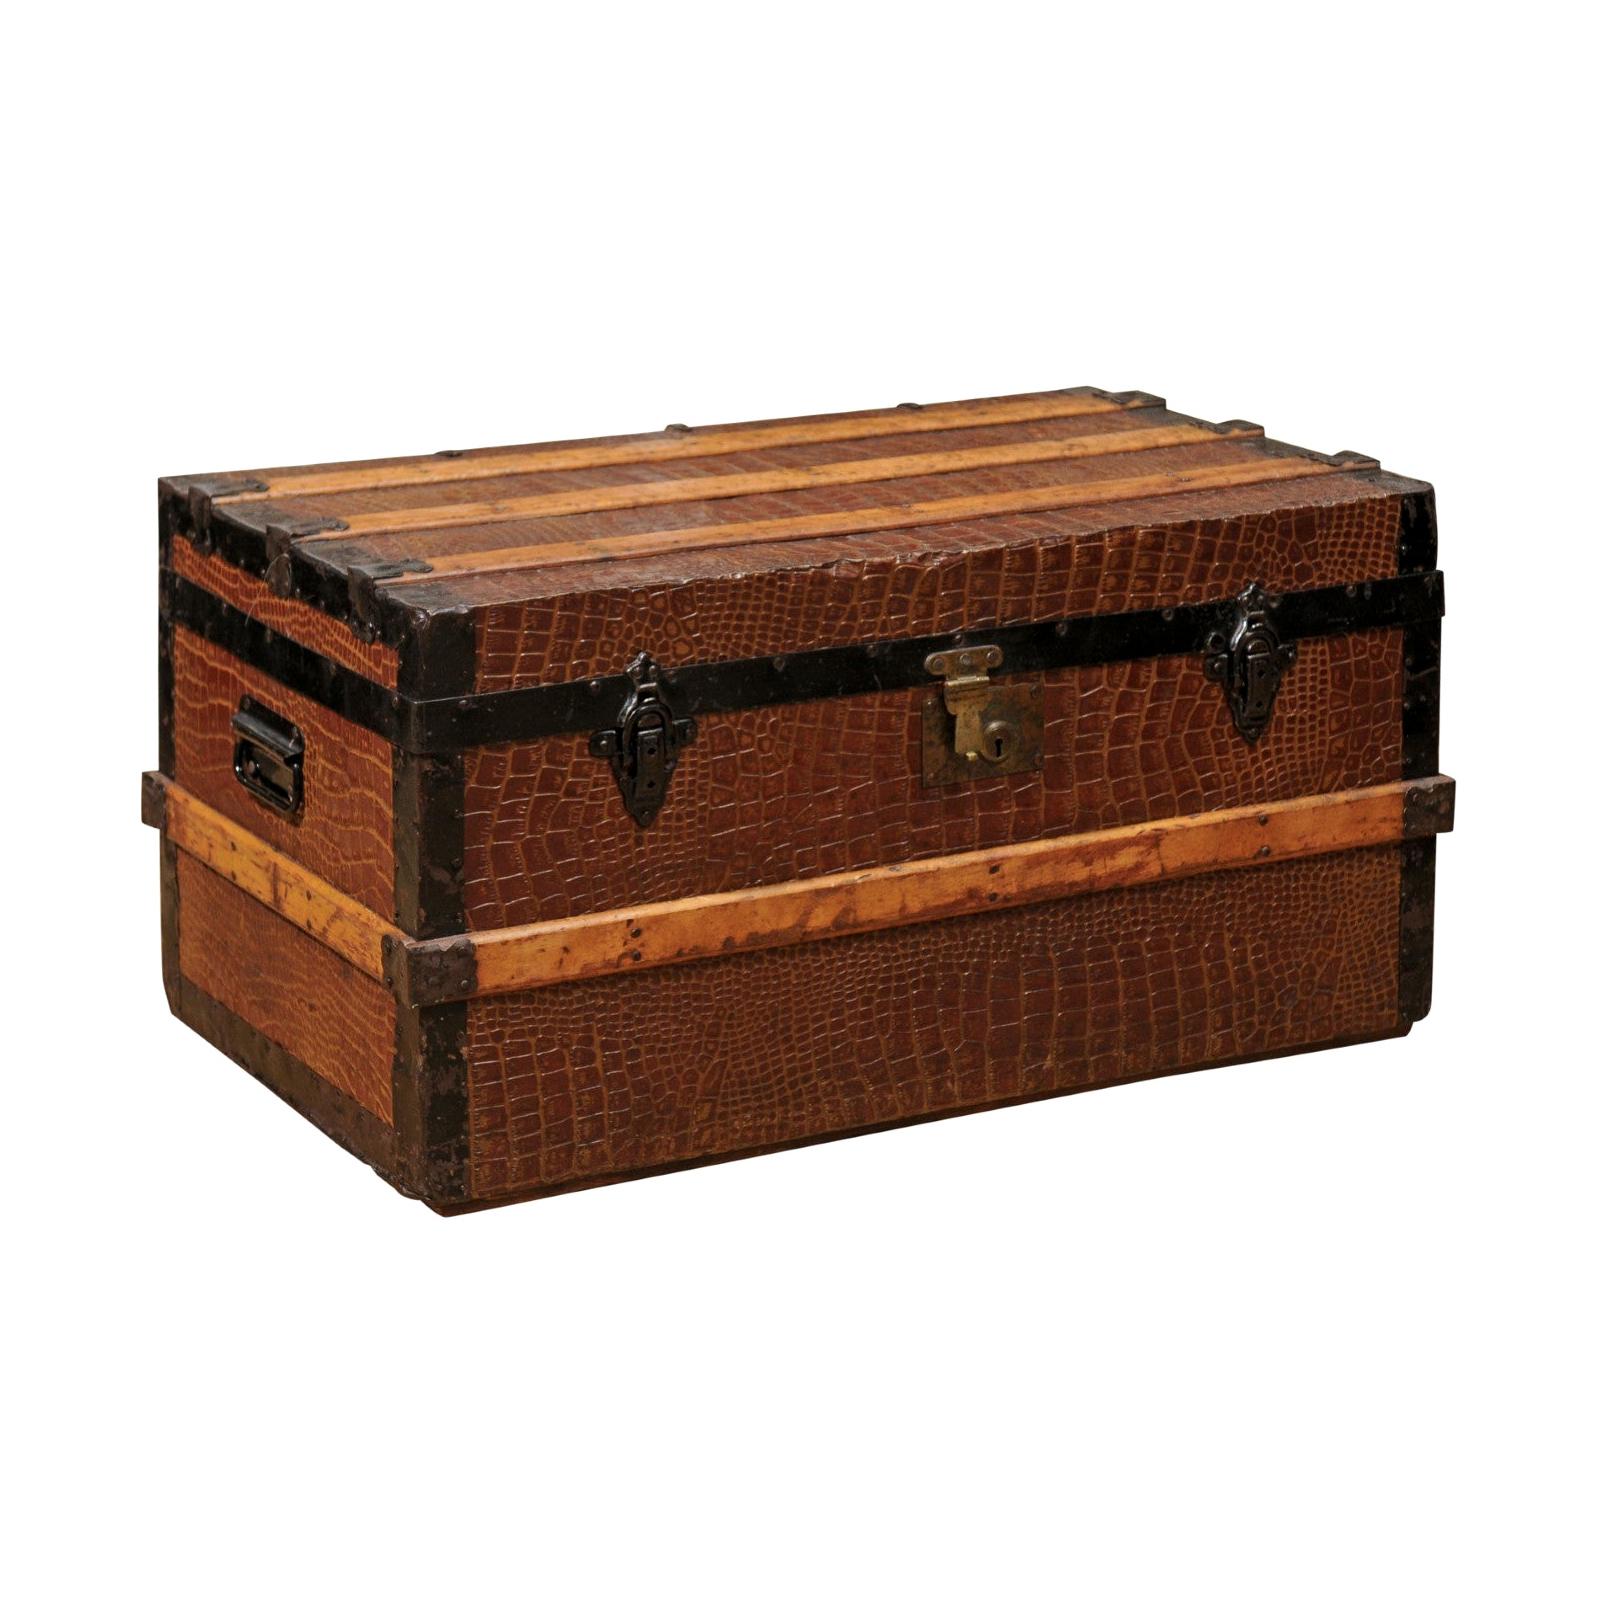 English 20th Century Wood Bound Trunk with Iron Details